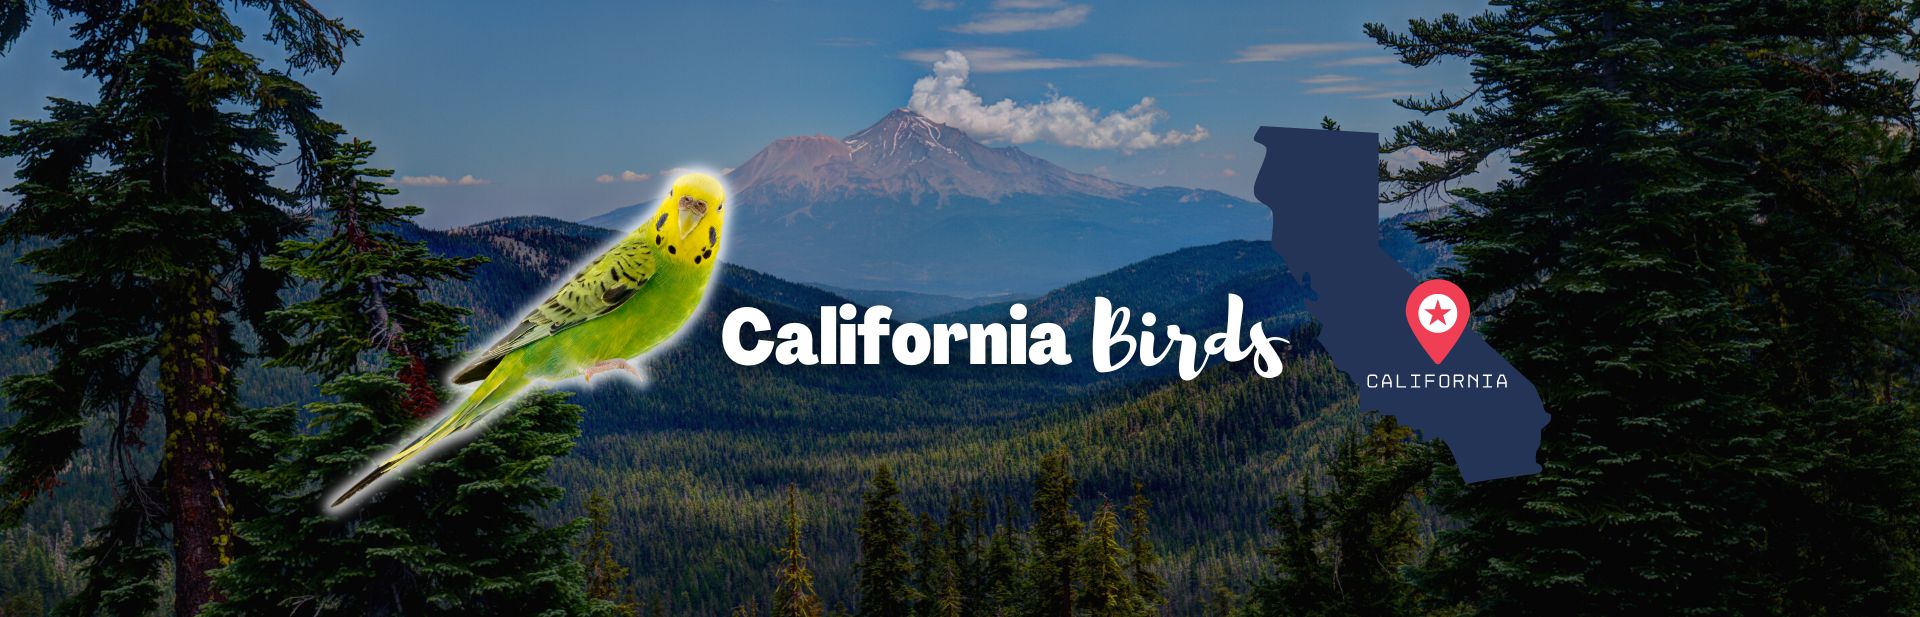 37 California Birds — They’re Unforgettable! All About the Avians of the Golden State